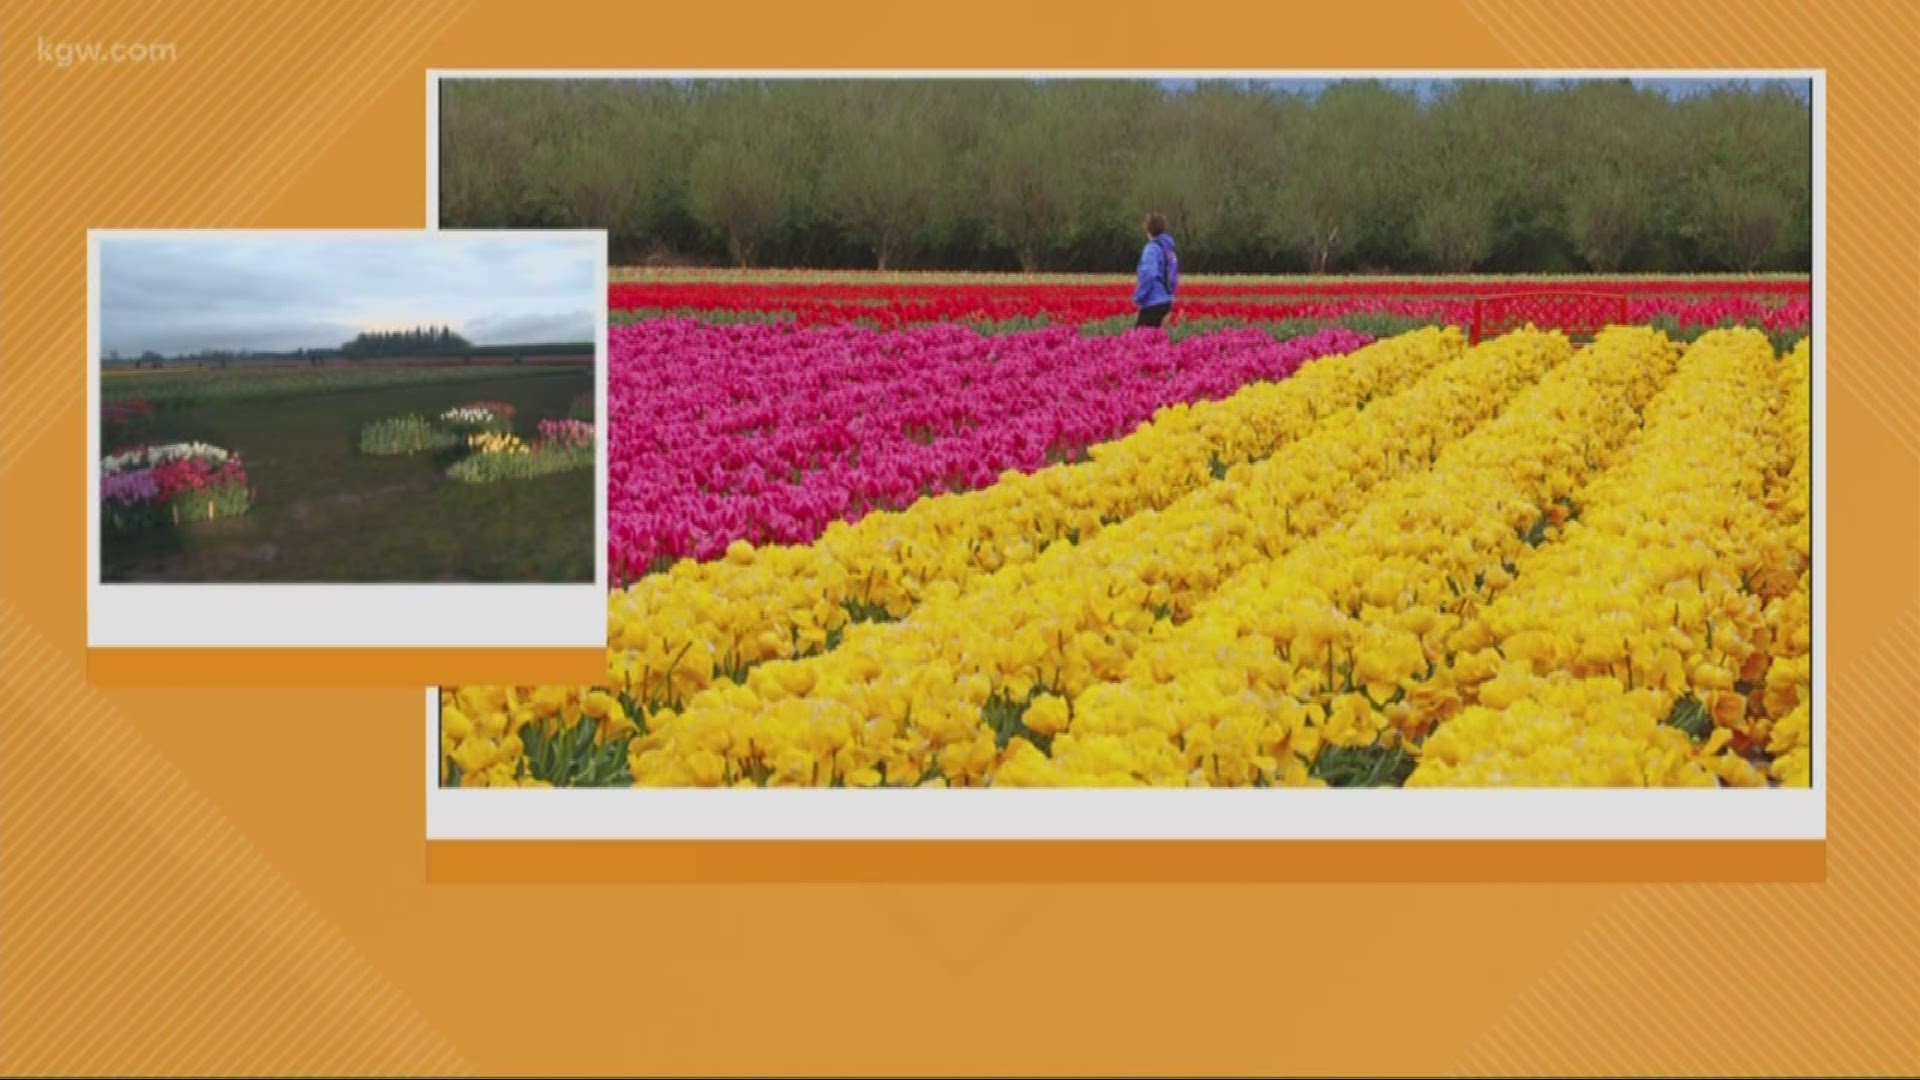 Rod chats with Gabrielle Mueller, the marketing director for the tulip festival